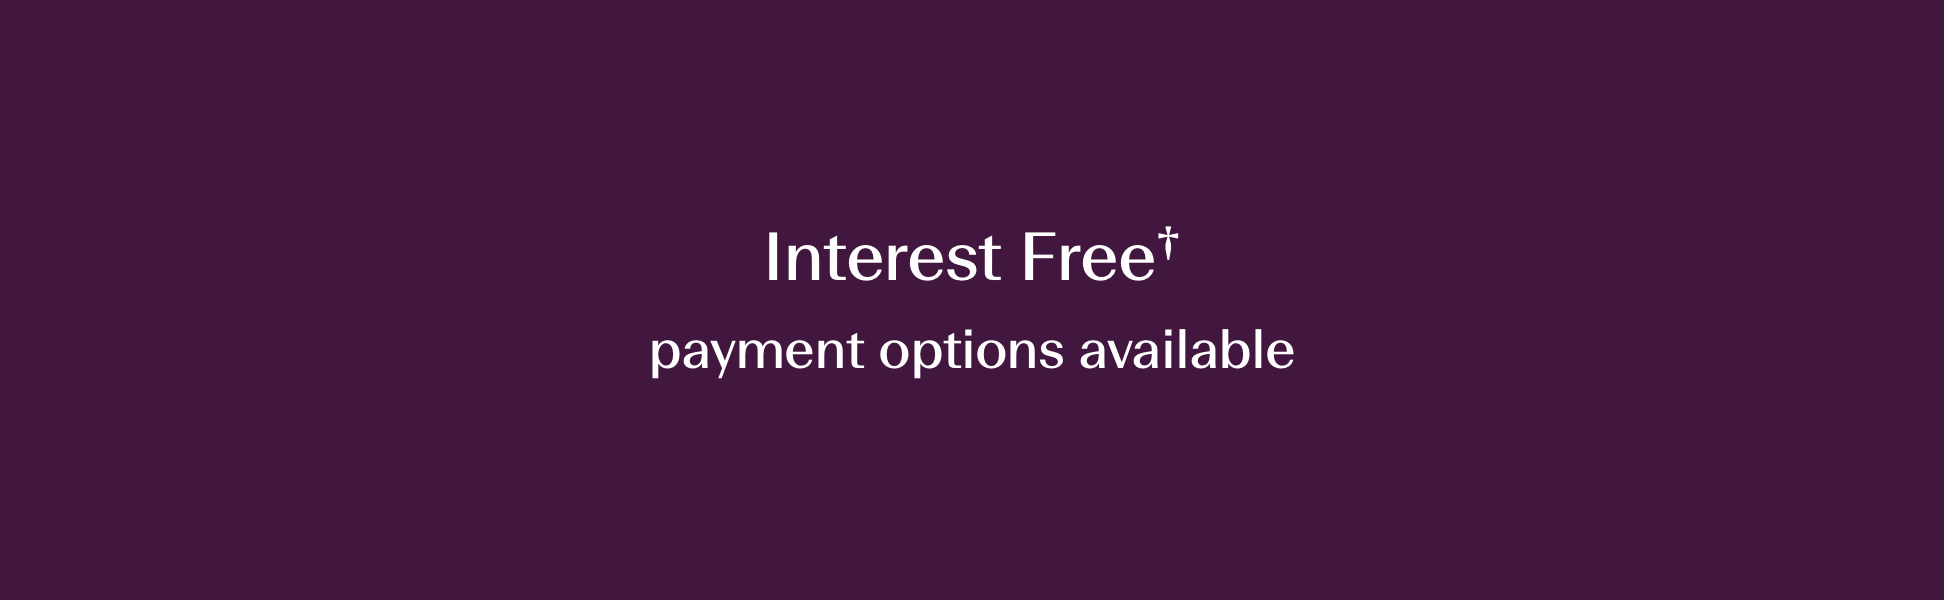 Interest free payment options available